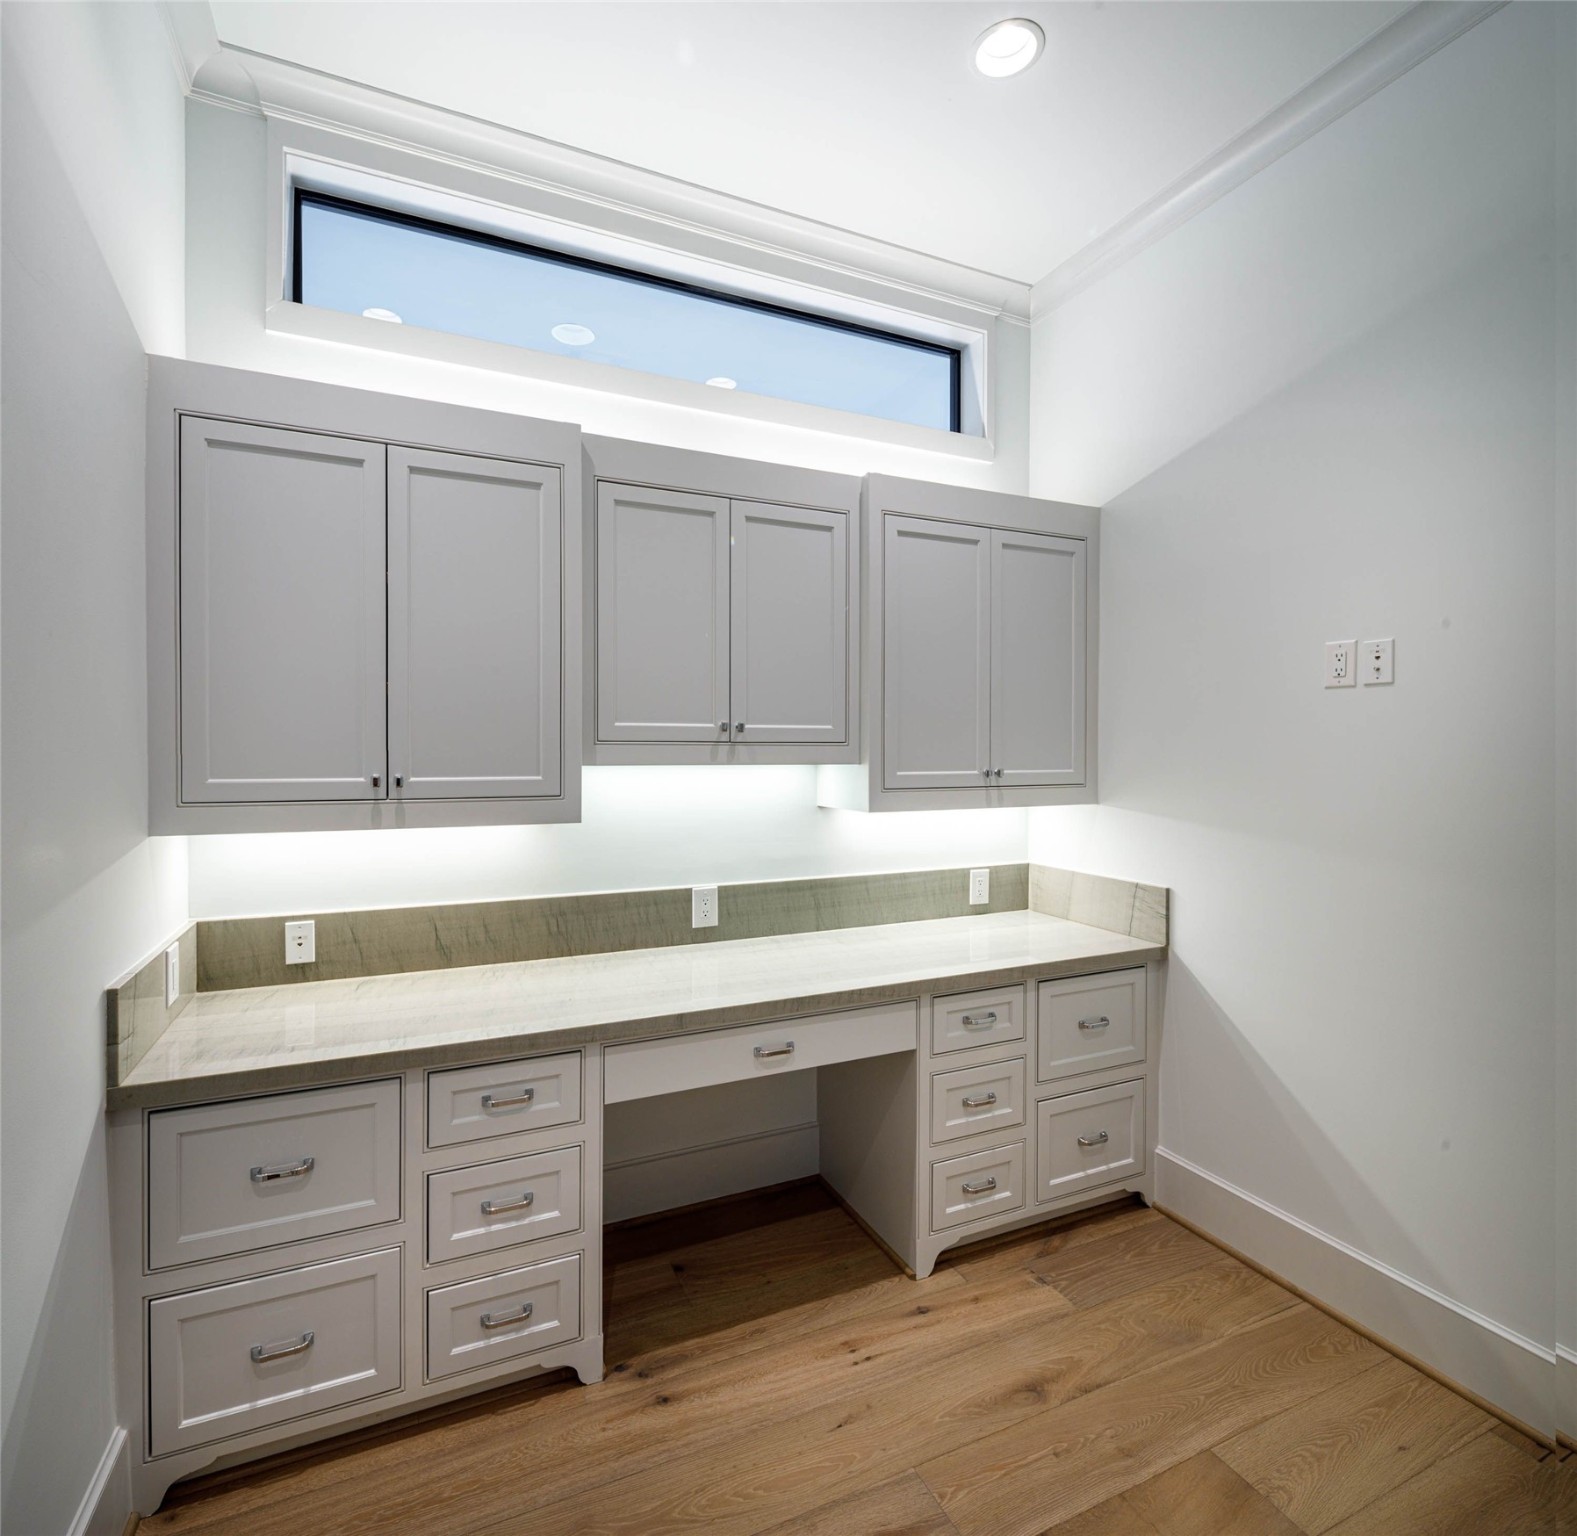 Second office or work space with custom built-ins and easy access to the kitchen